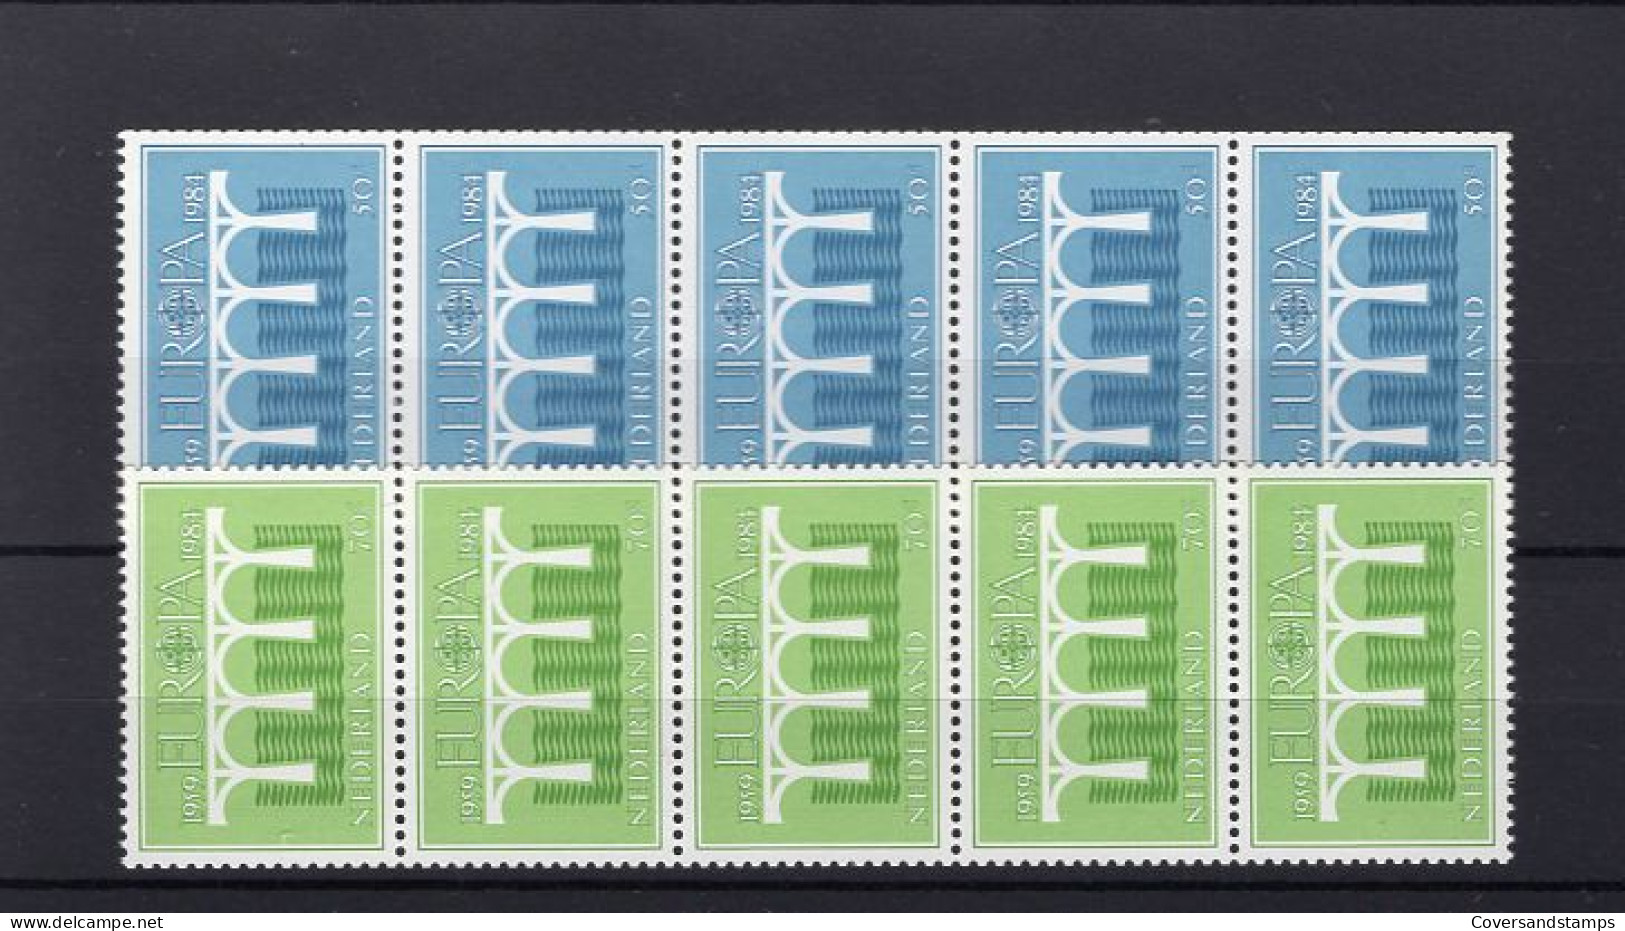  Nederland - NVPH 1307/1308 In Strips Of 5, Number 900 And 500 ** MNH - 1984